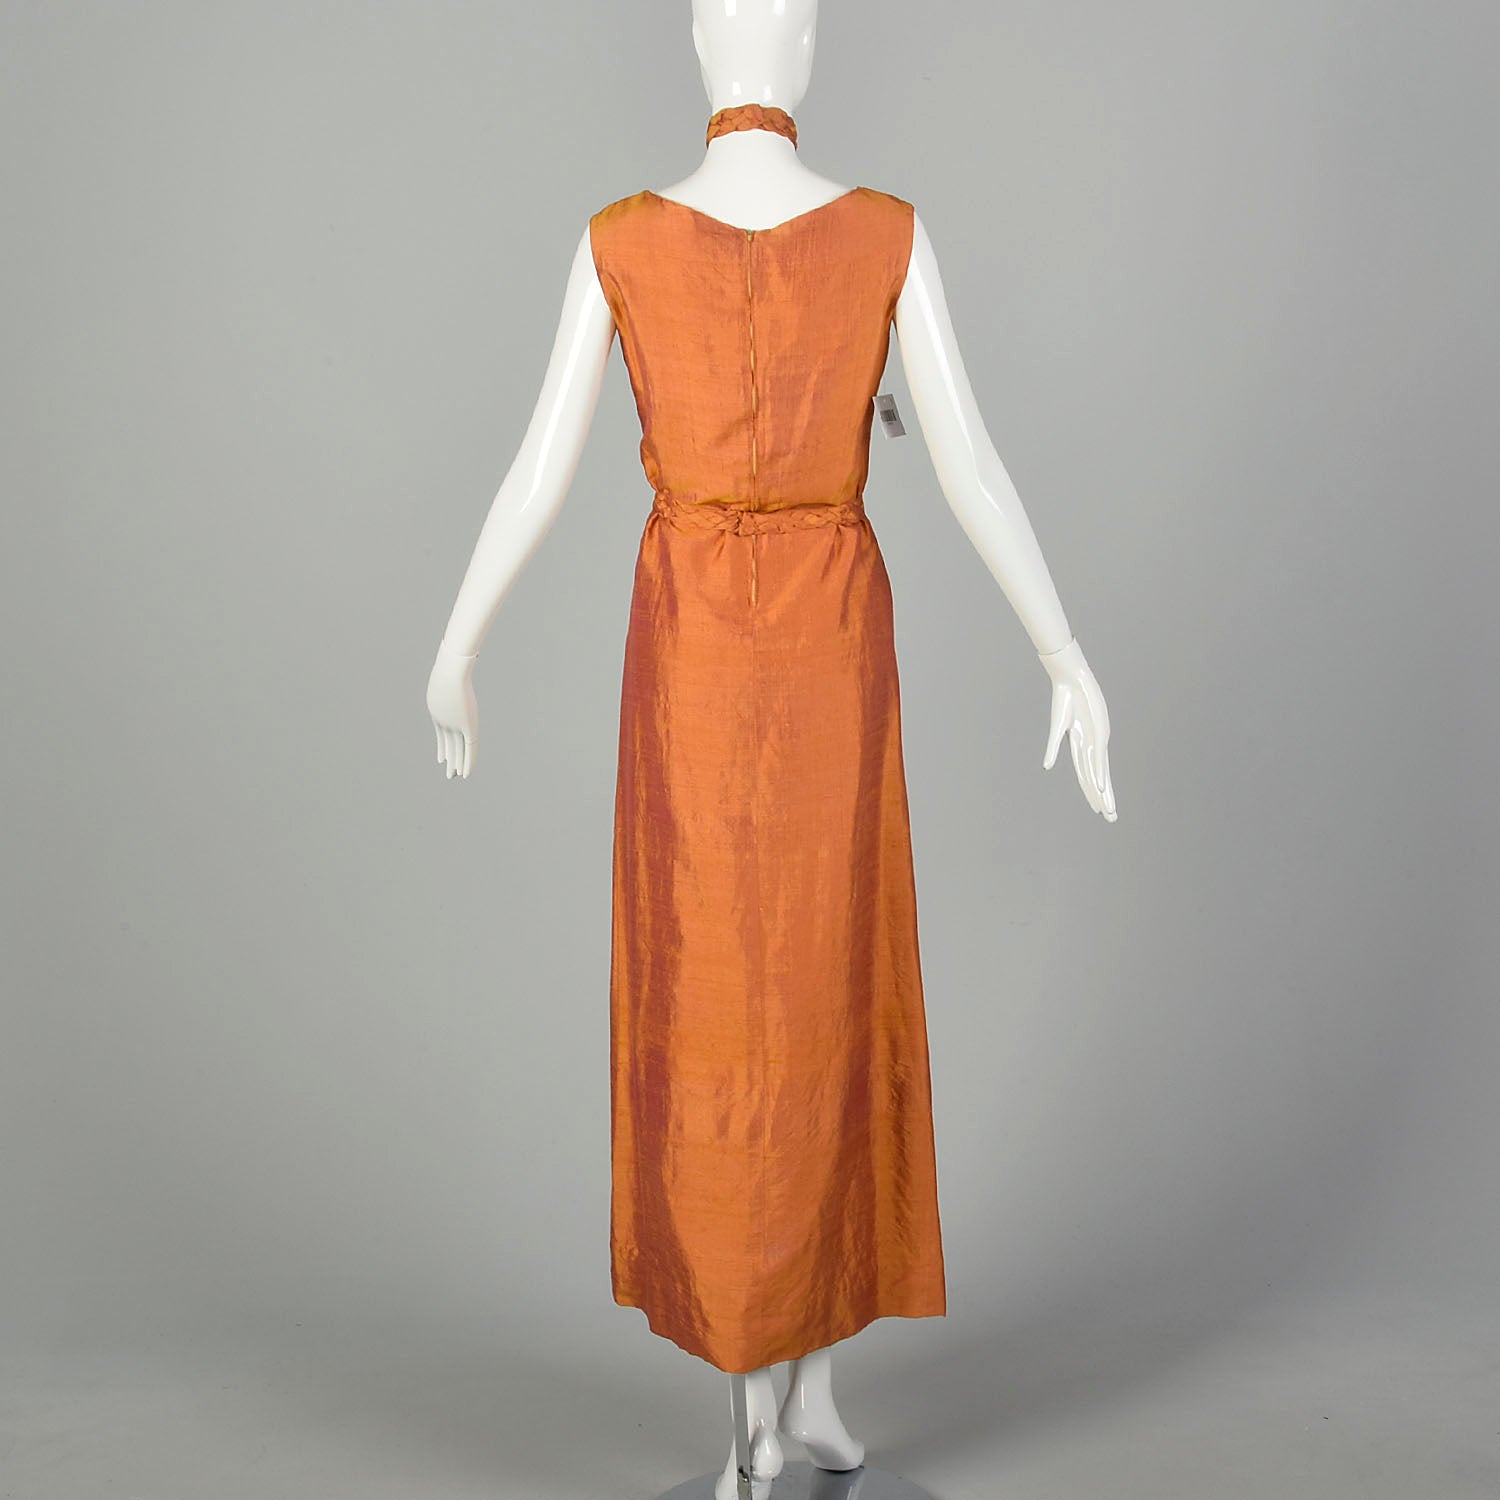 Small 1990s Orange Red Gold Silk Dupioni Sharkskin Dress with Belt and Accessories